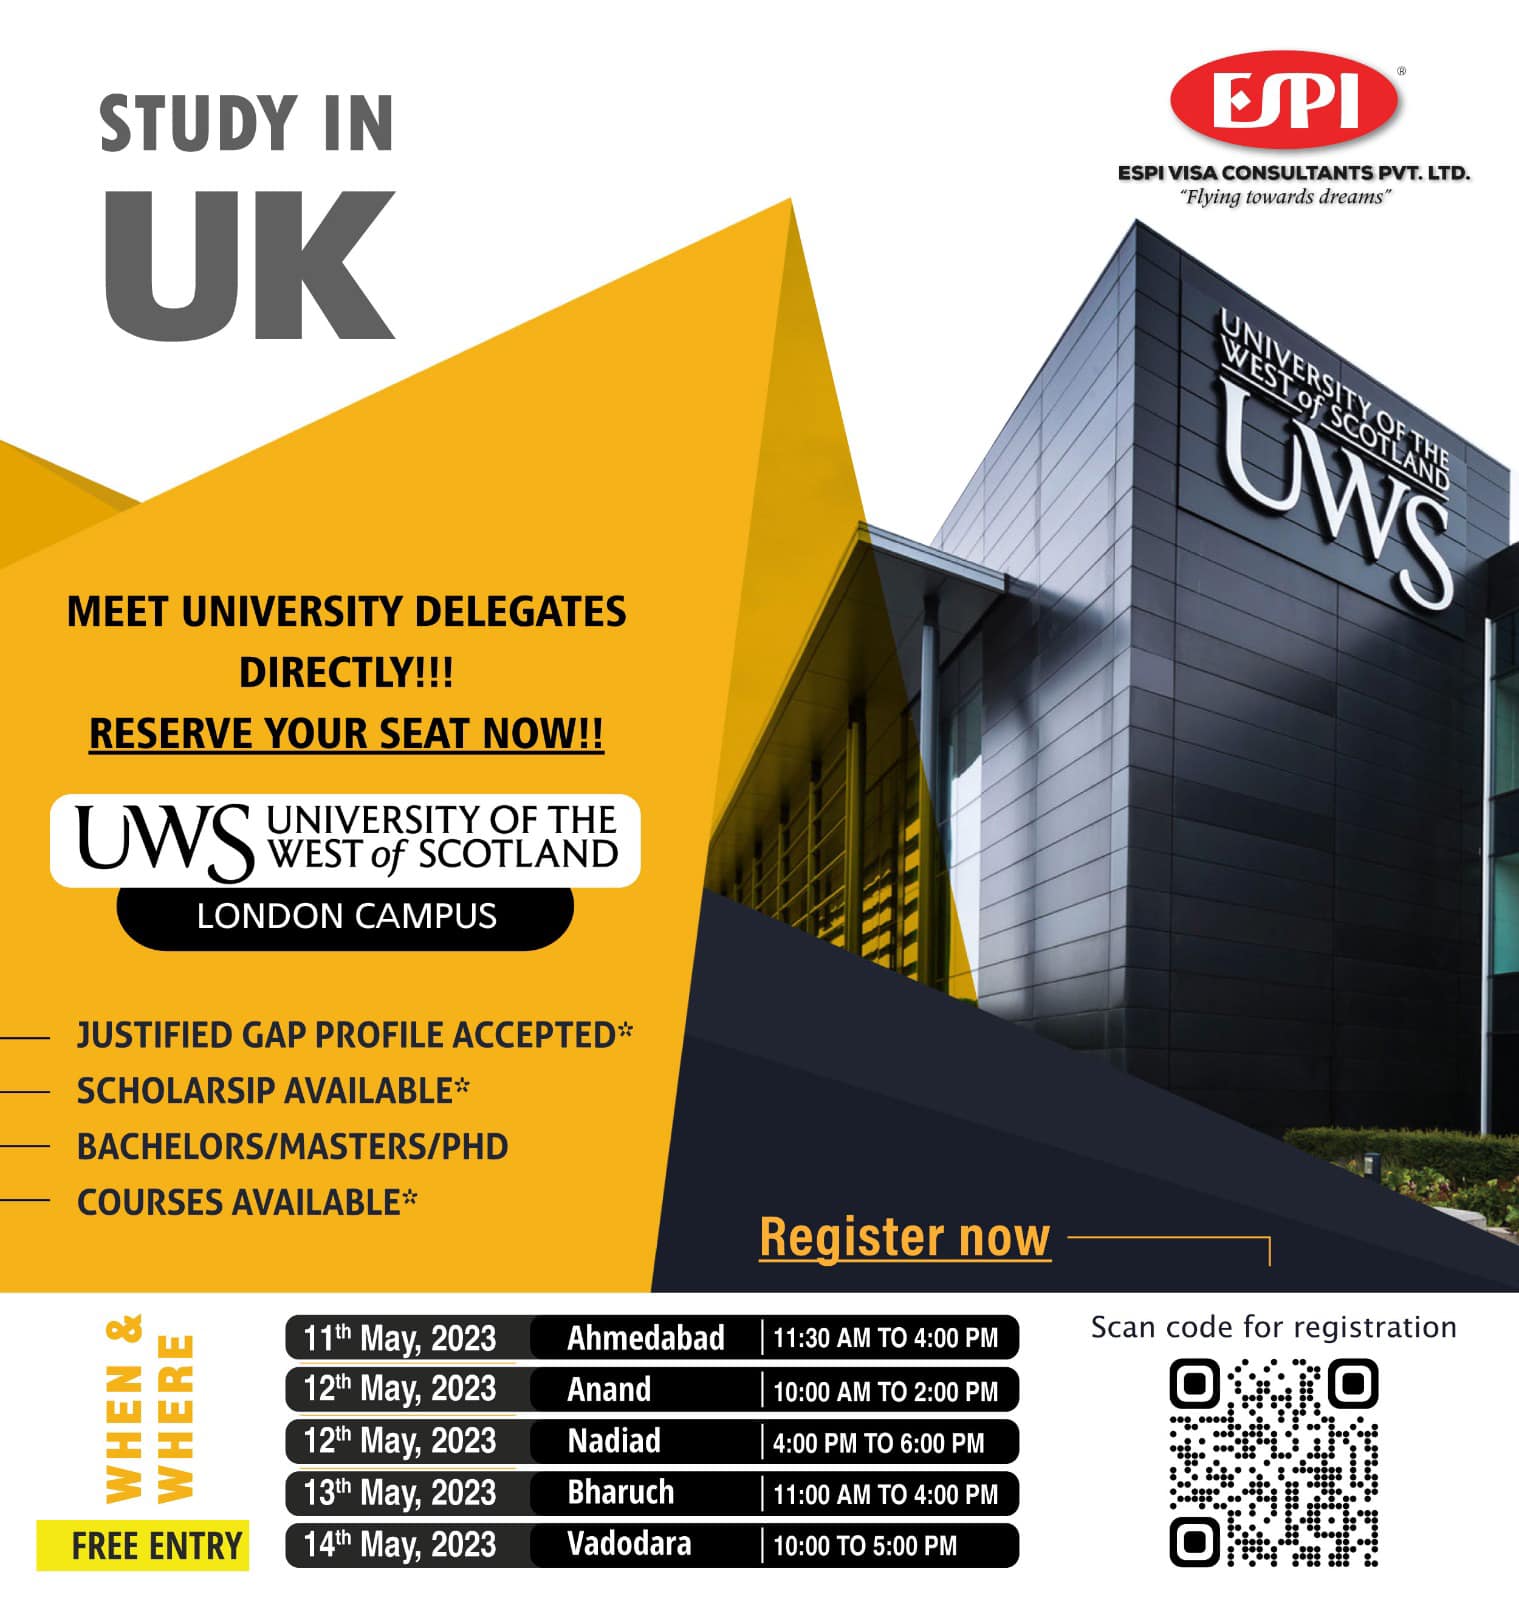 Register Now and Study in UK without IELTS at UWS London, Vadodara, Gujarat, India